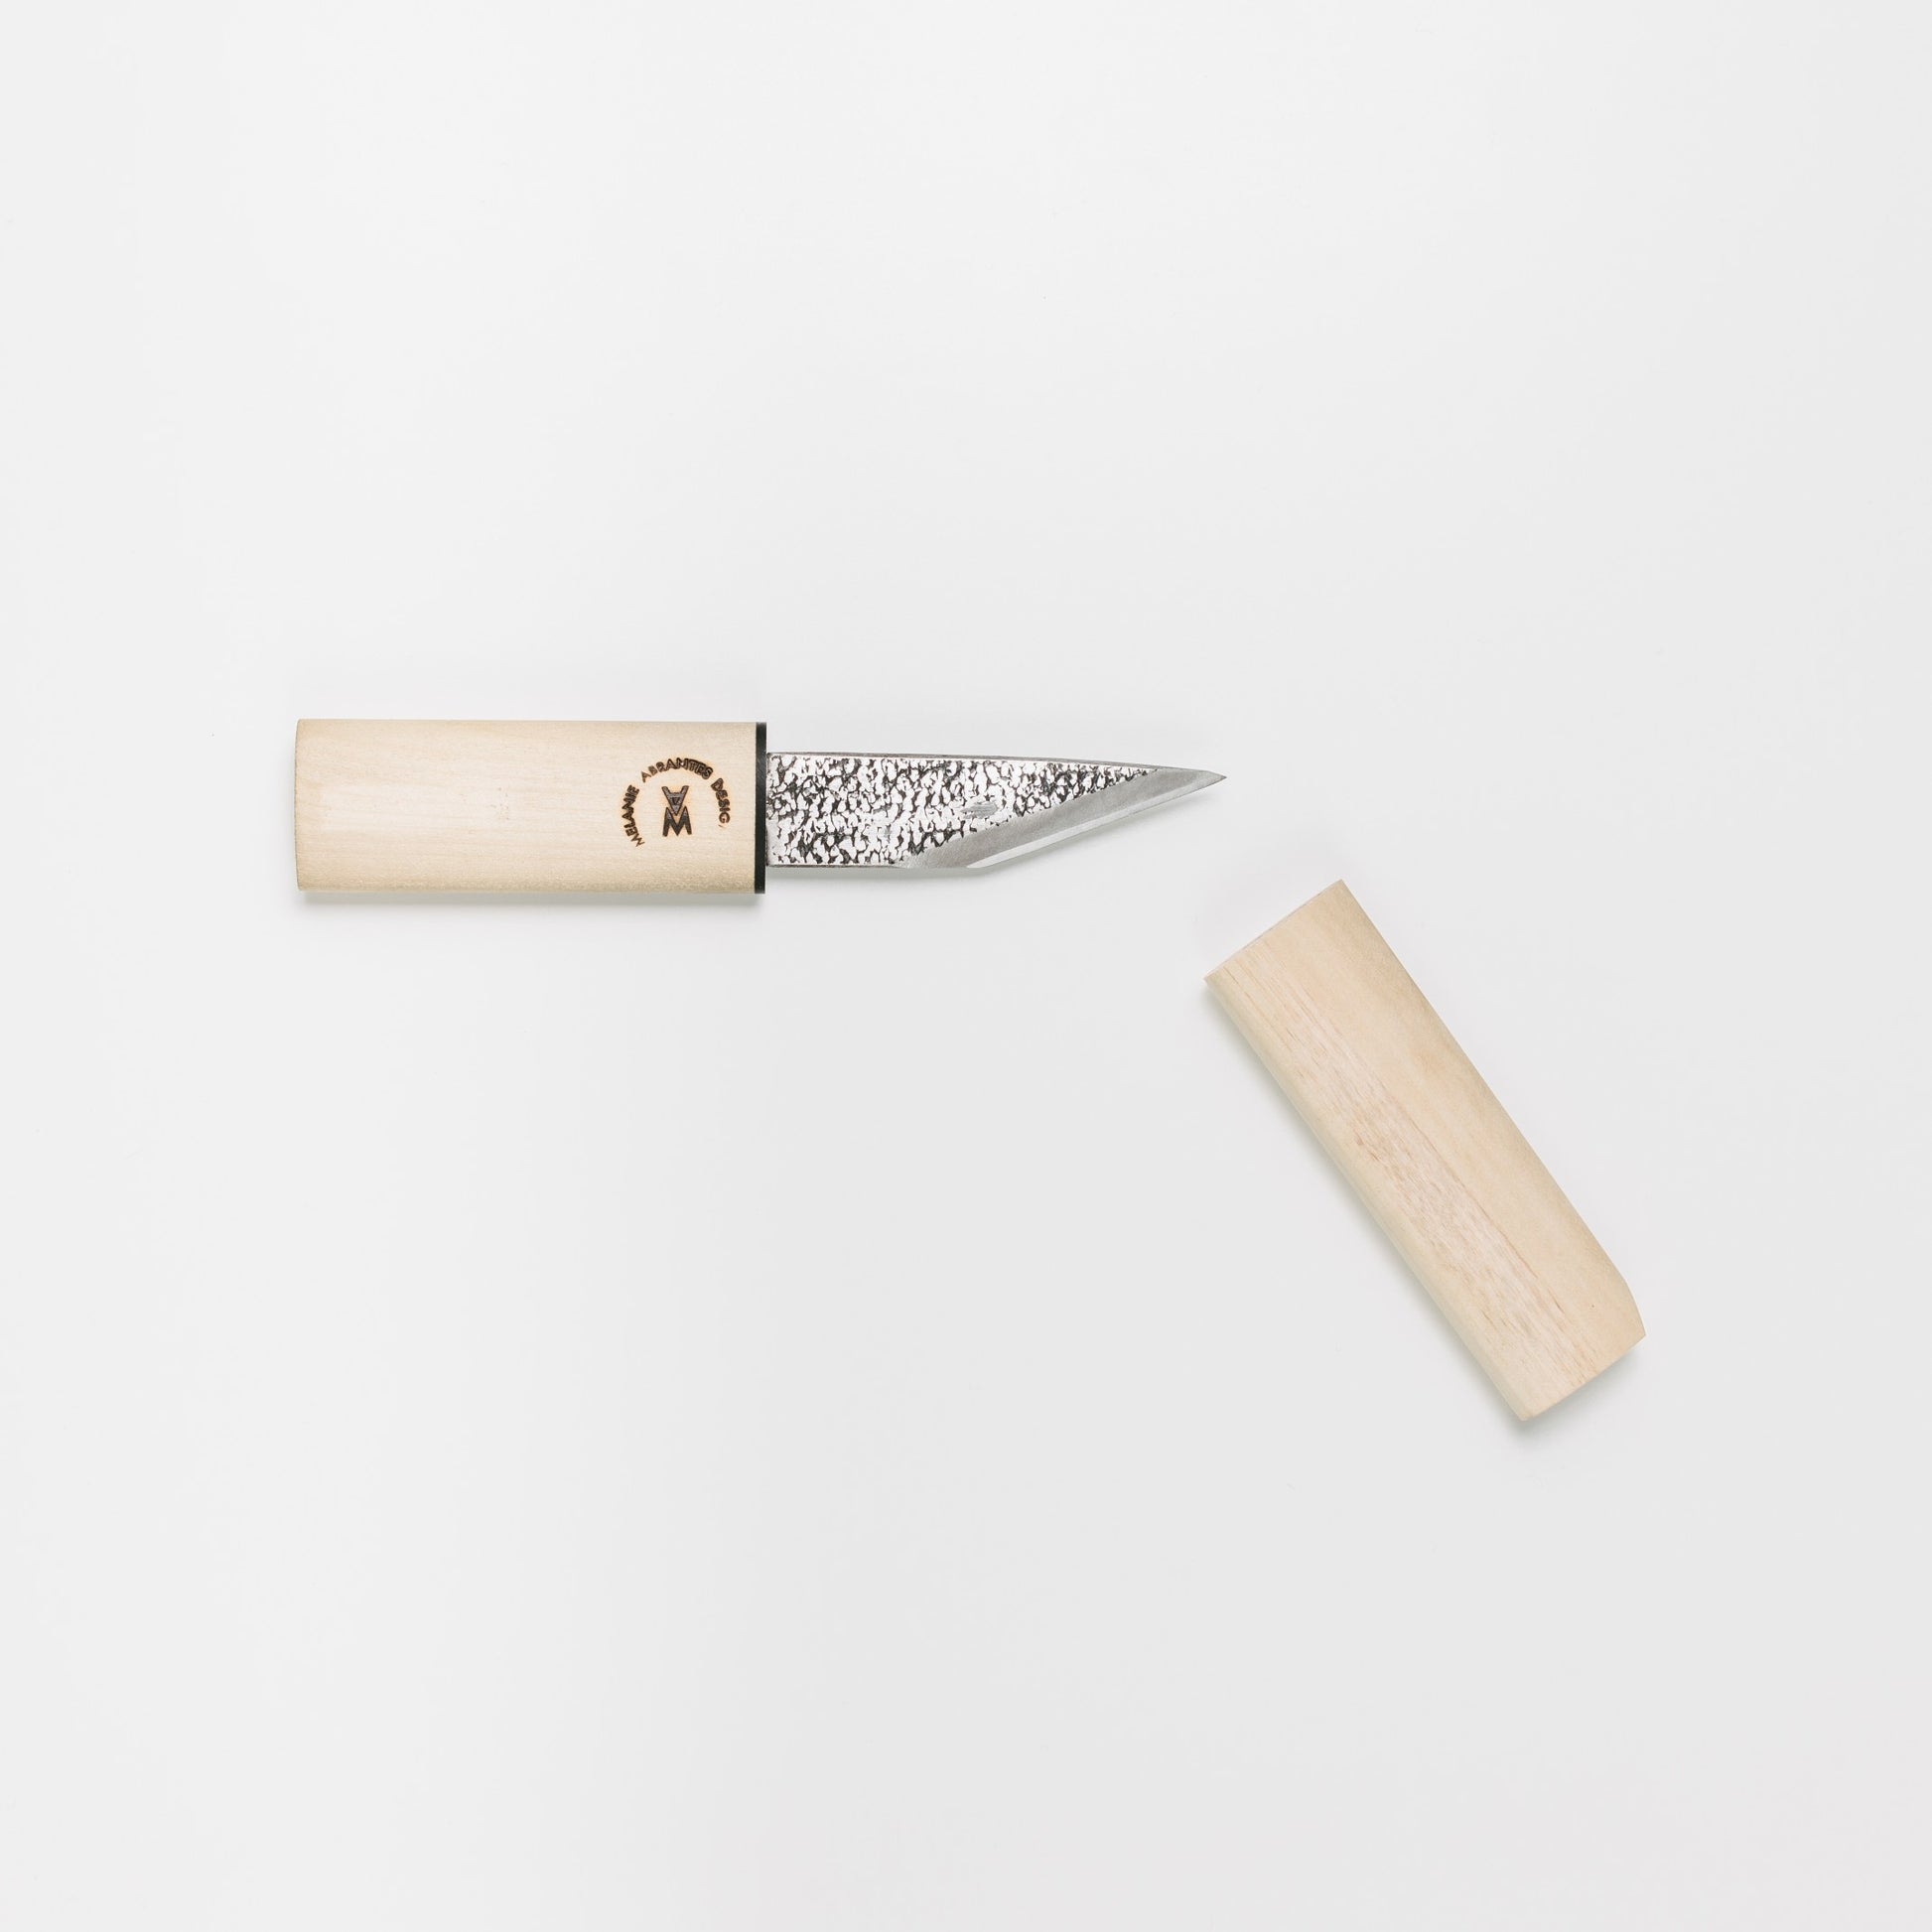 Japanese carving knife. The blade is beveled only on one side creating a thinner edge compared to a knife beveled on both sides, allowing for extremely fine cuts. Left or right-handed available.